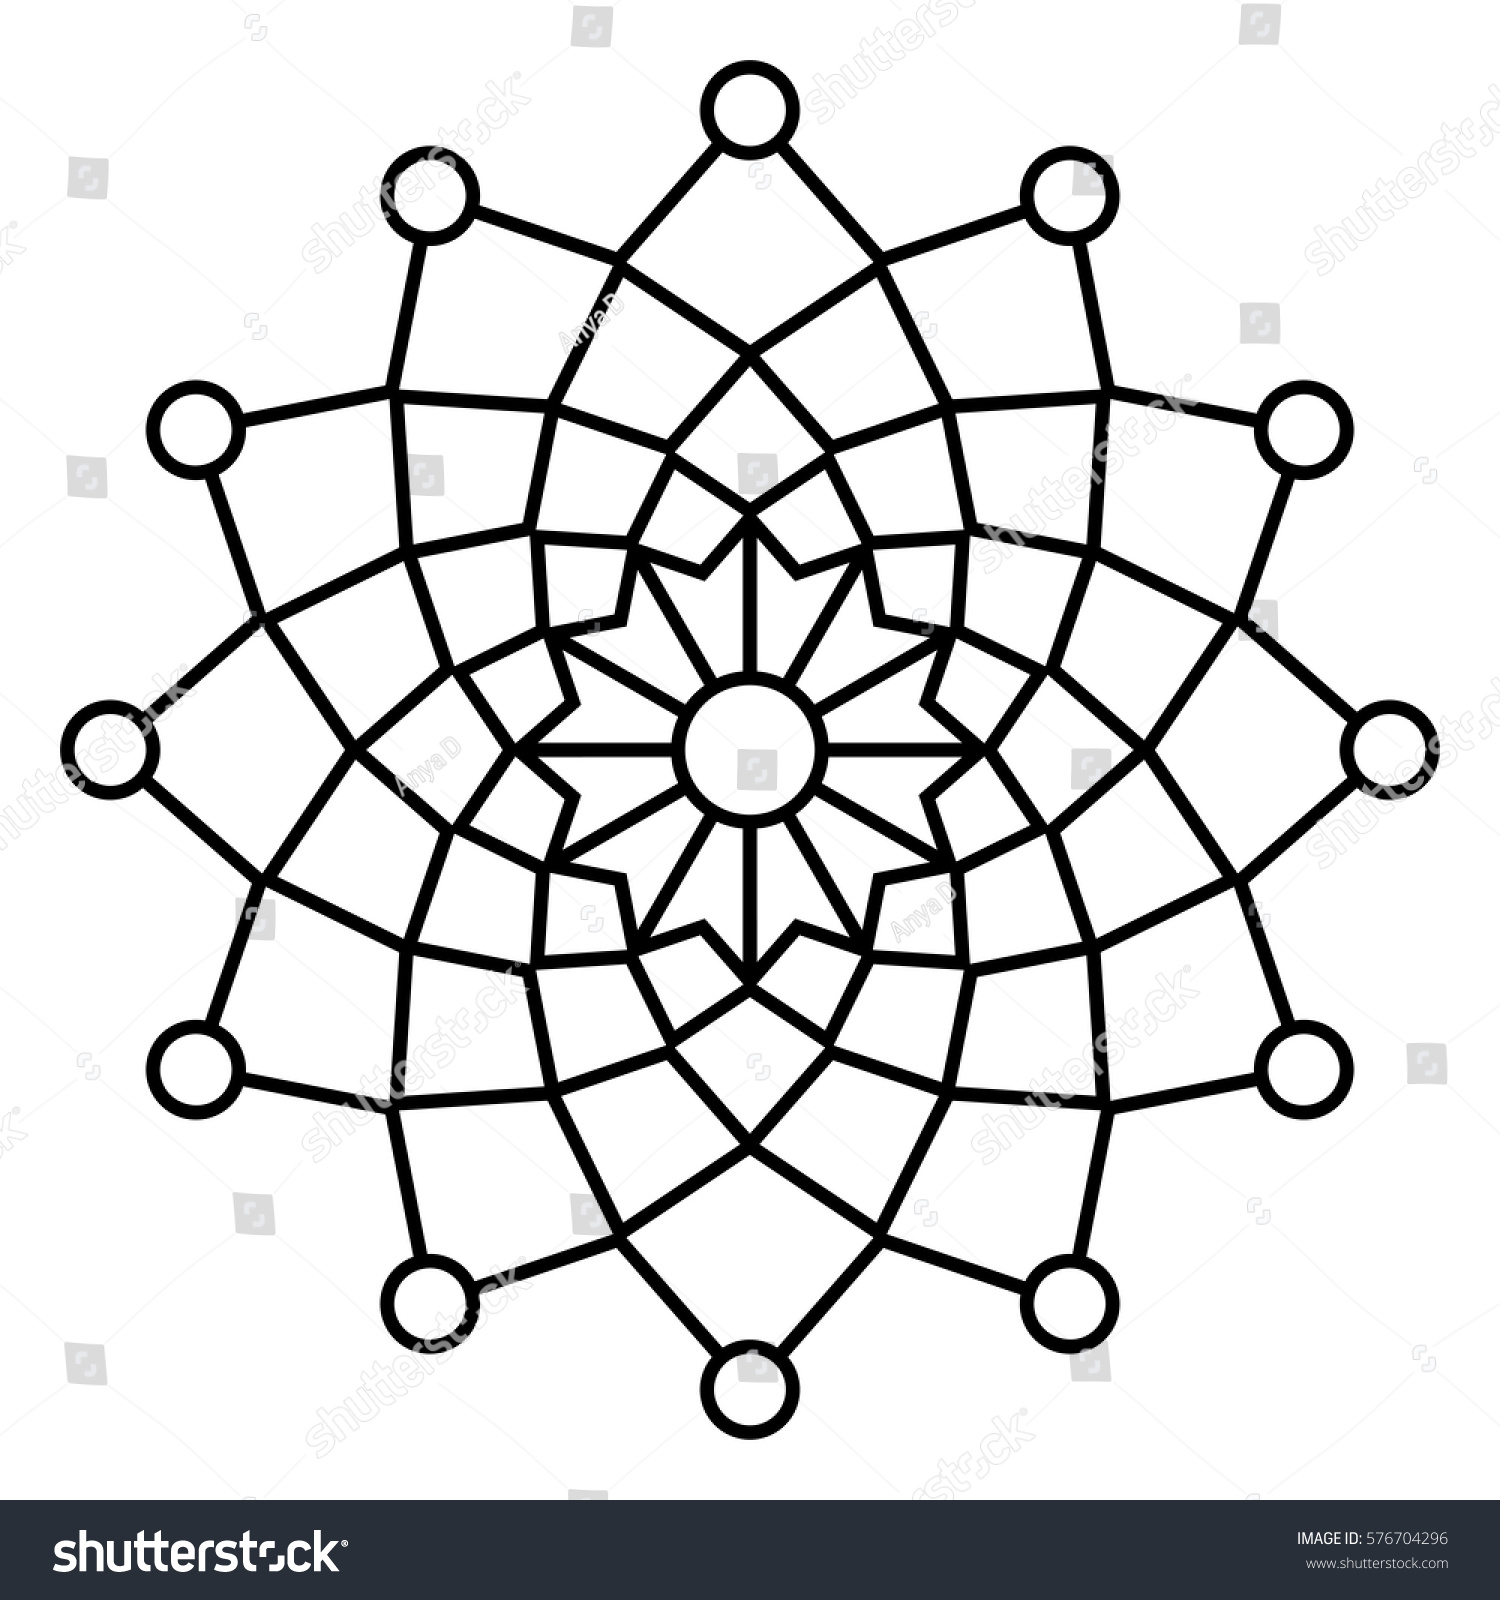 Simple Floral Mandala Pattern Easy Doodle Stock Vector Royalty Free